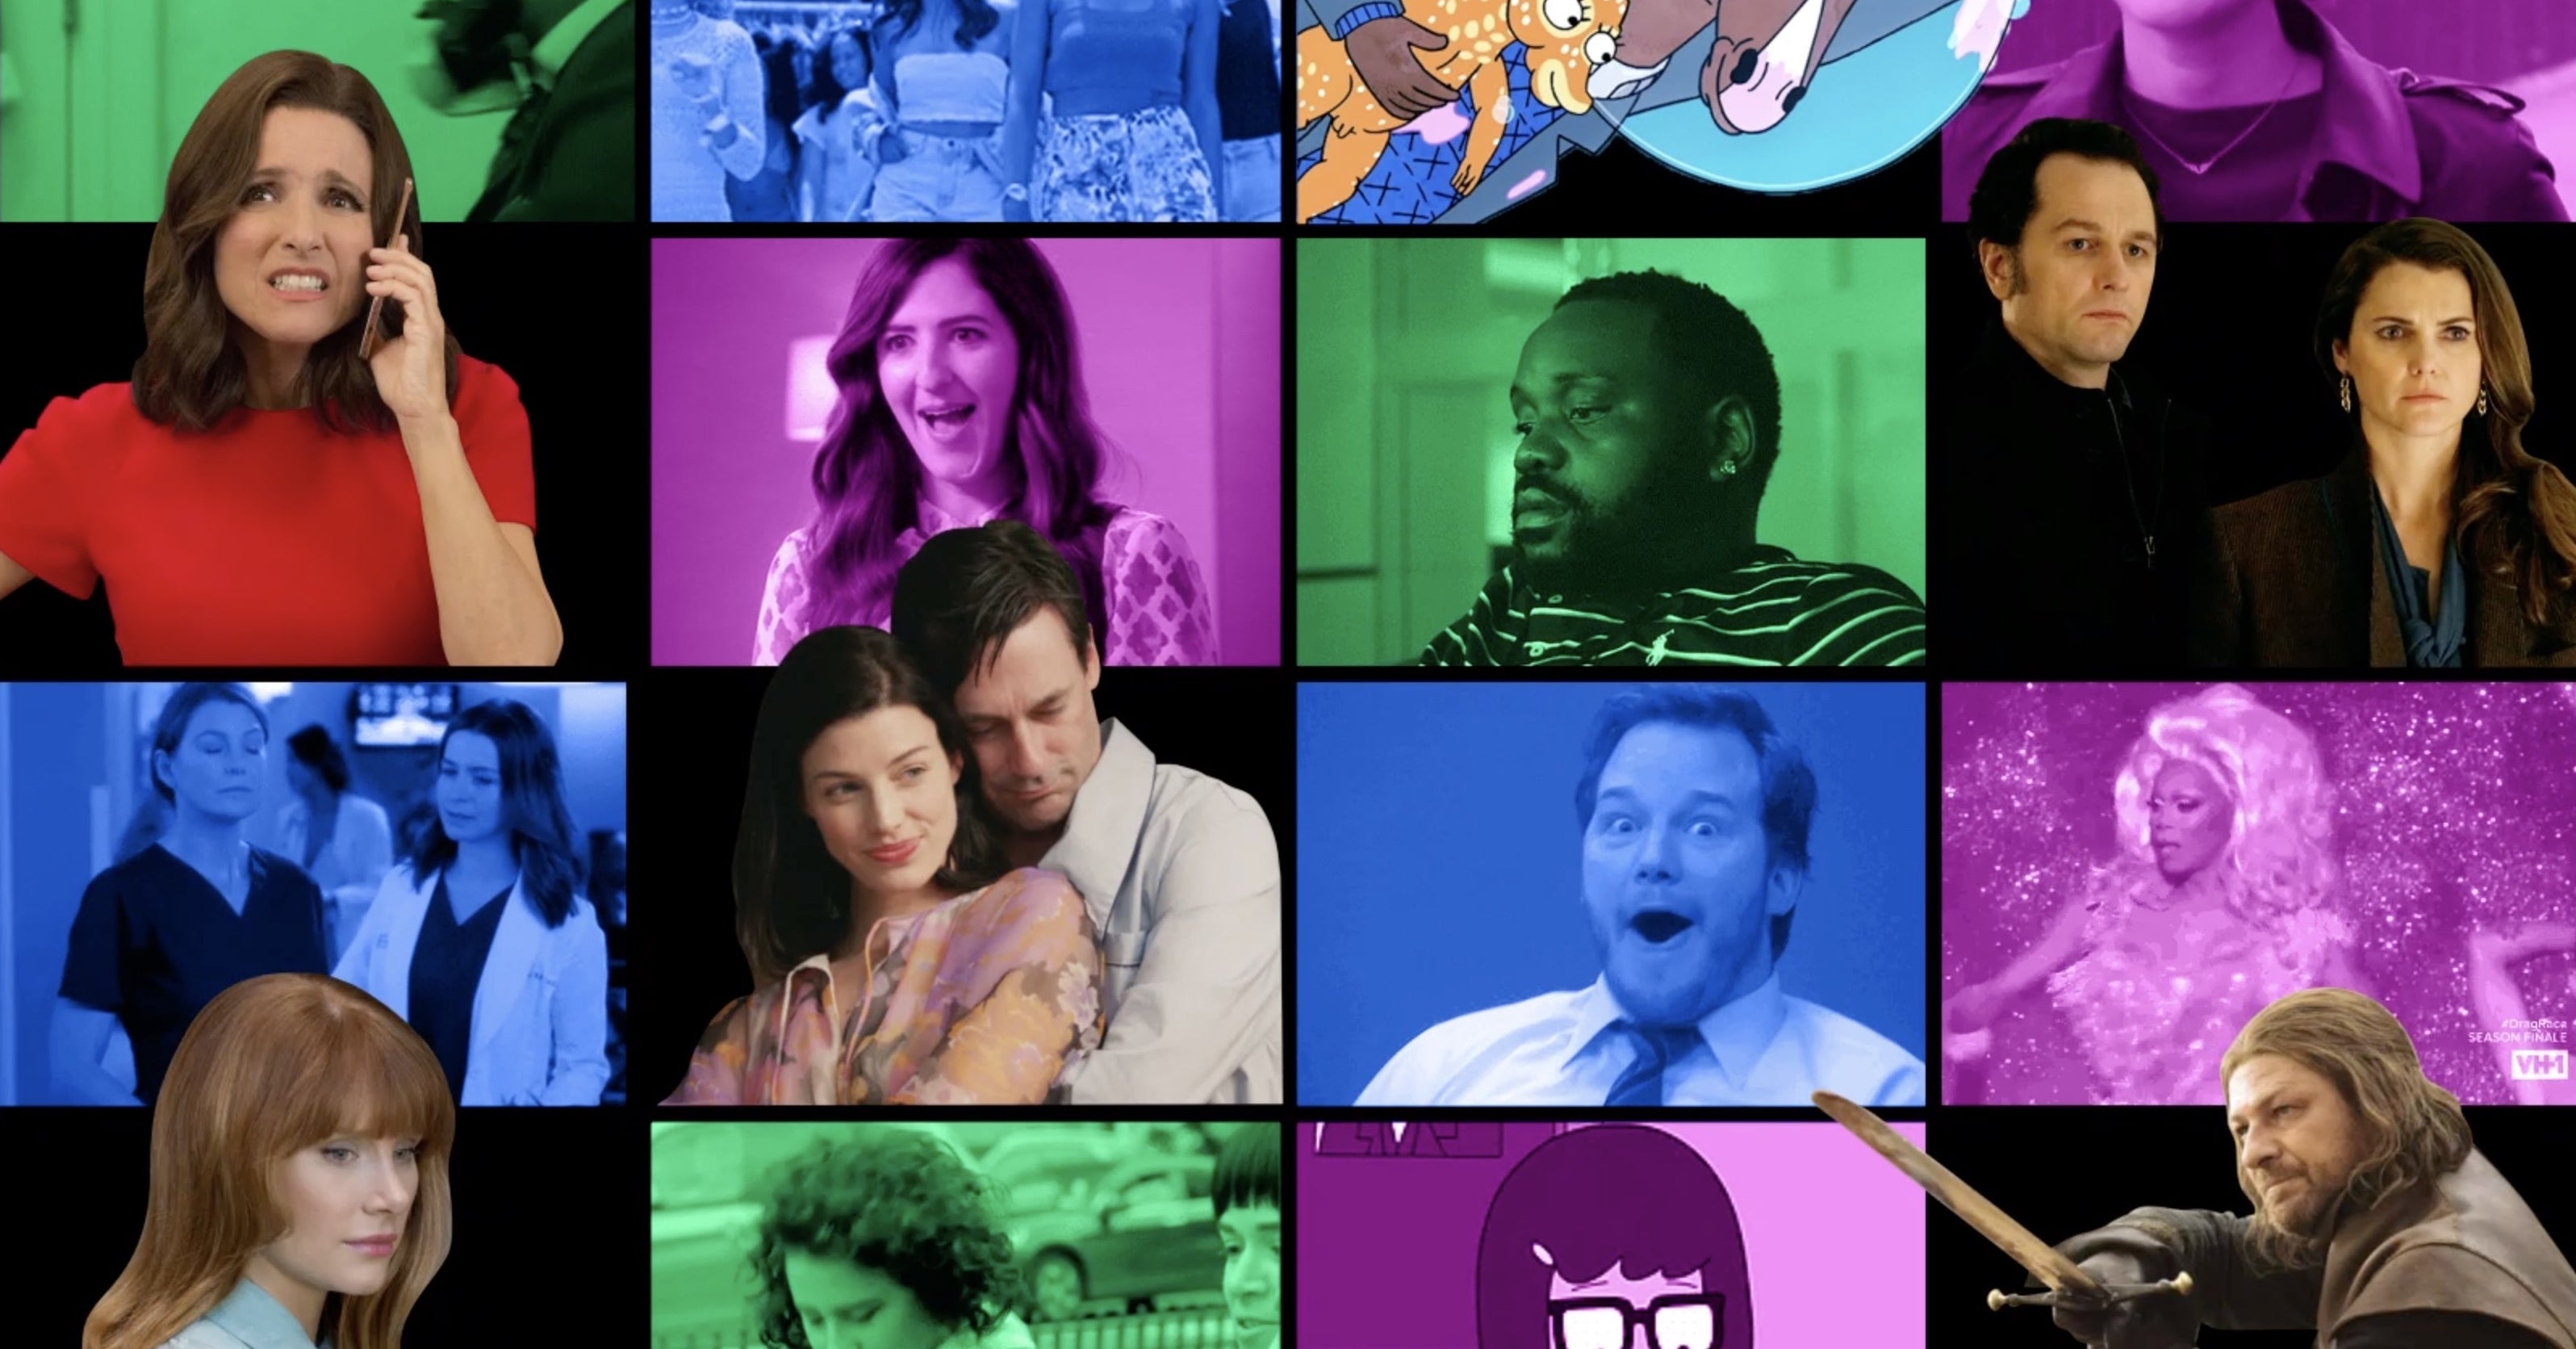 Swing Season Episodes Jon And Jess - The 25 Best TV Episodes Of The Decade